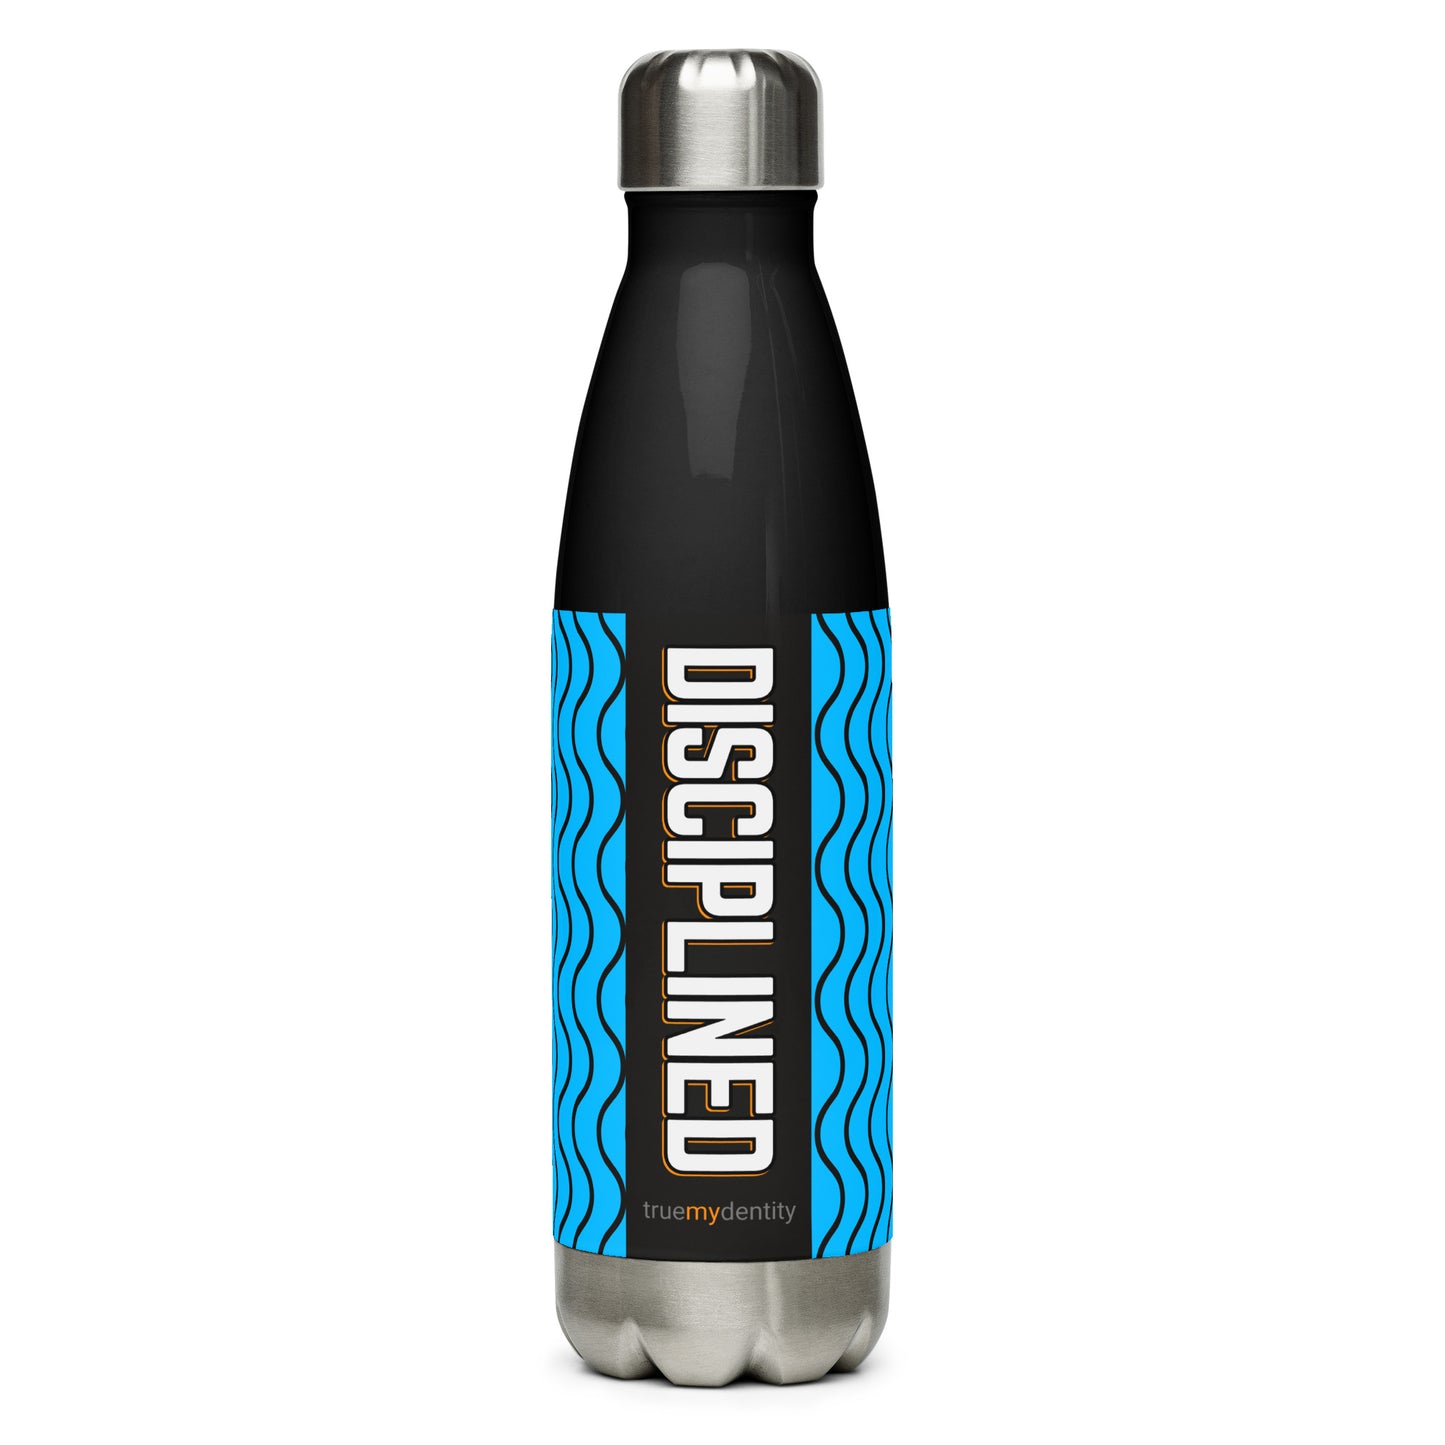 DISCIPLINED Stainless Steel Water Bottle Blue Wave Design, 17 oz, in Black or White